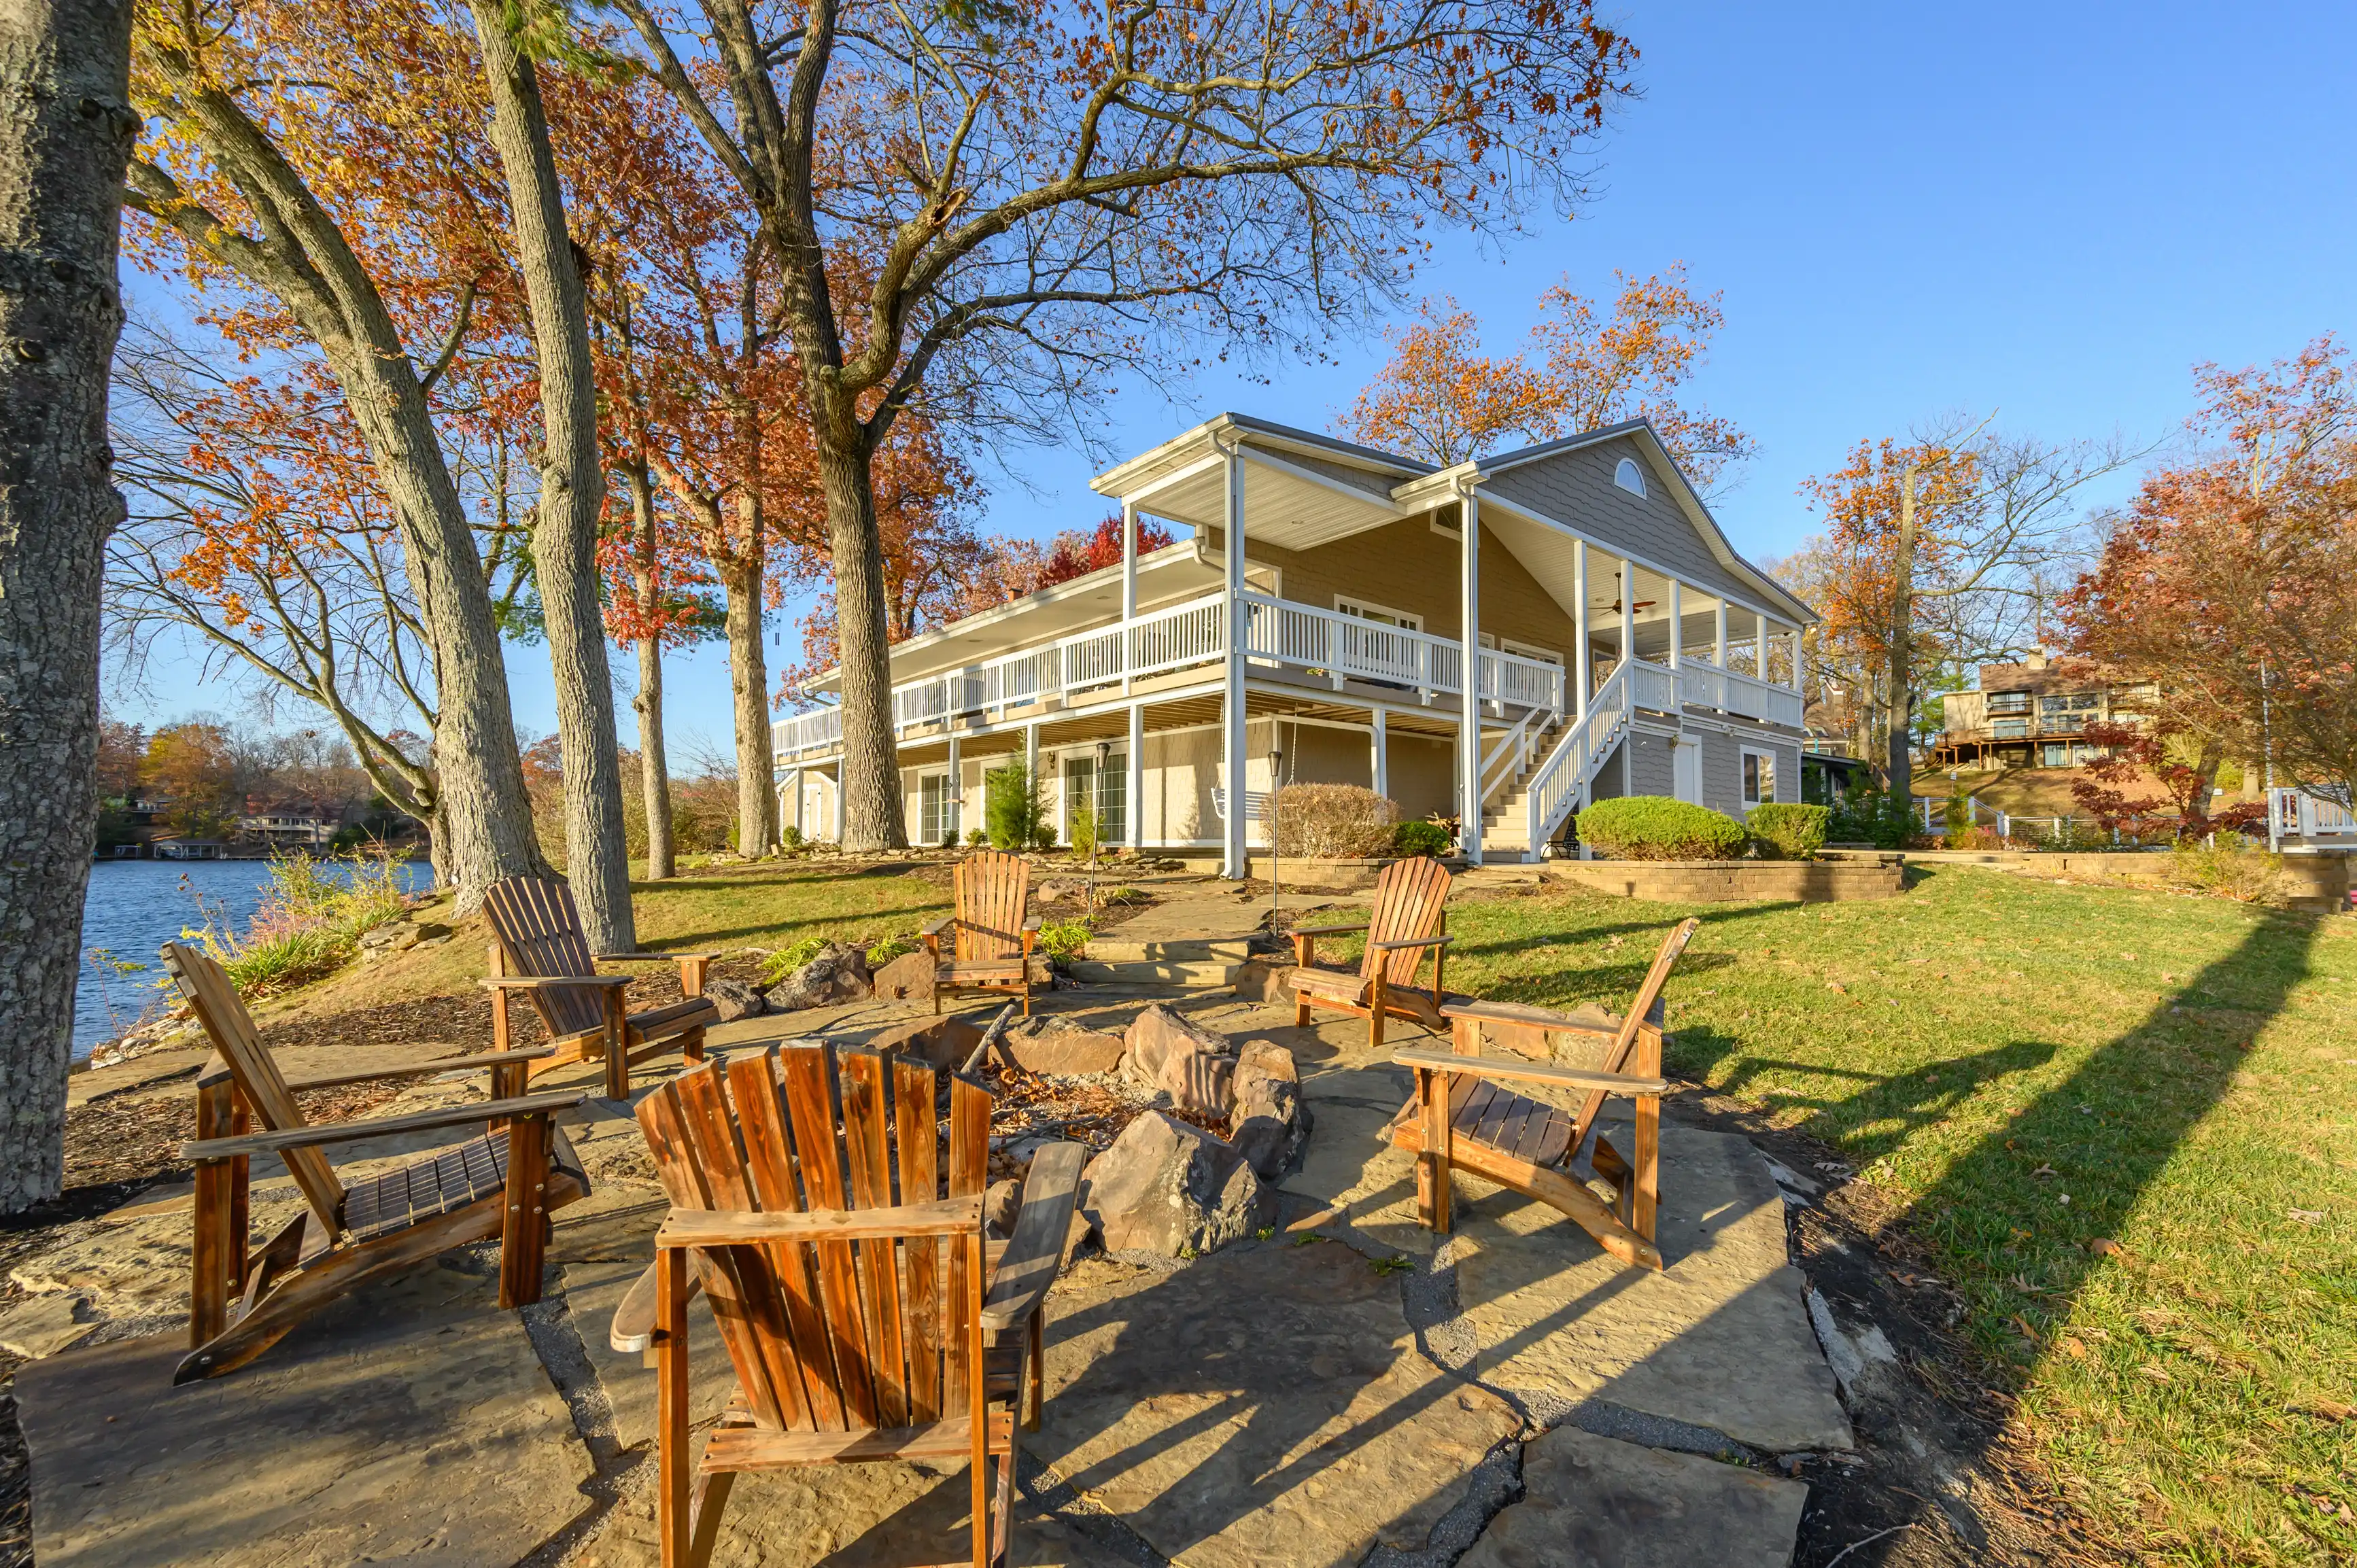 Wooden chairs arranged around a fire pit by a lakefront house with a porch during autumn.